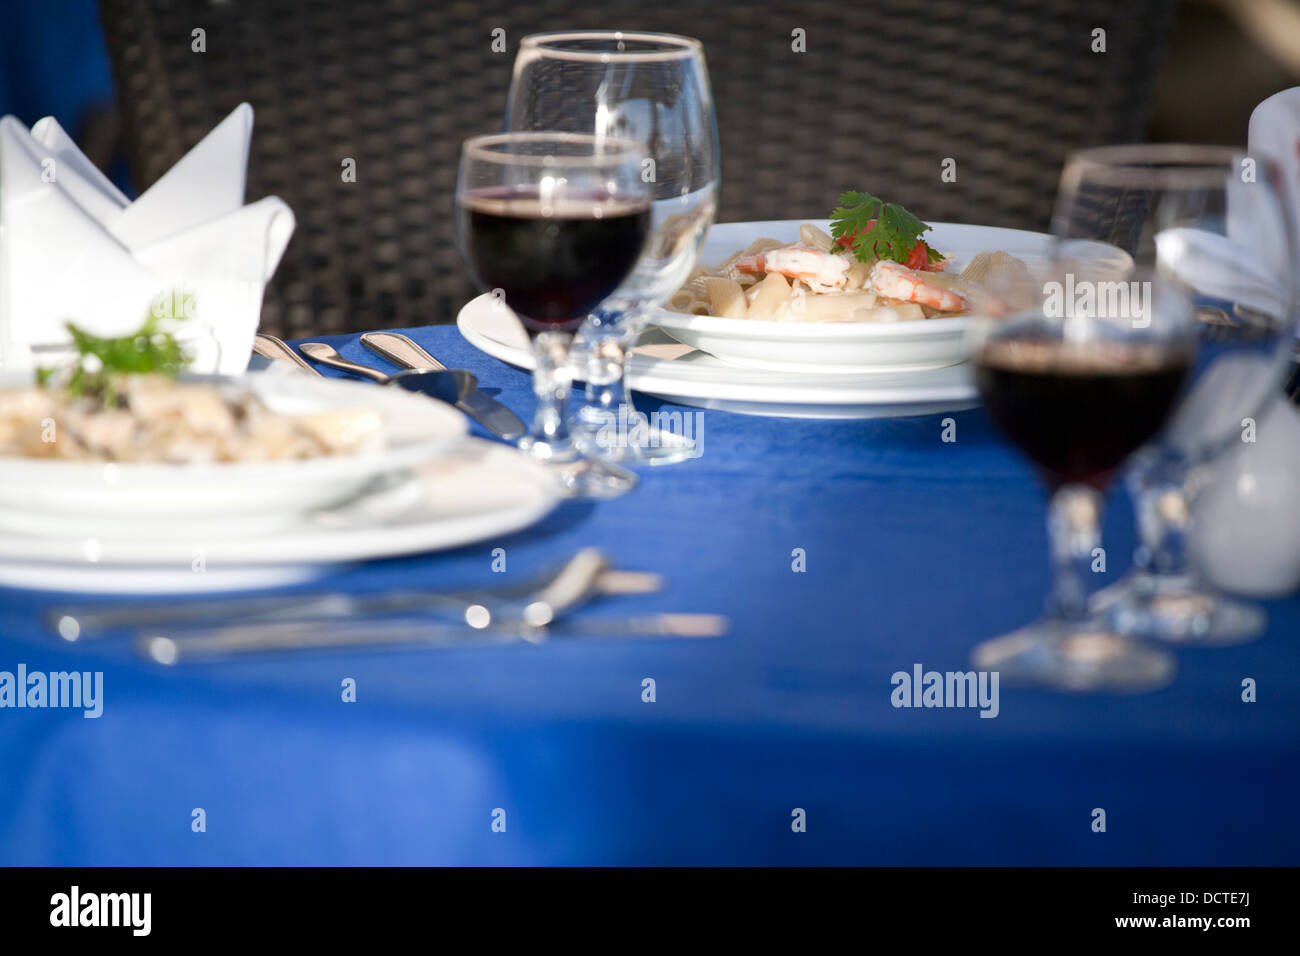 Extreme shallow focus image of pasta dish on a table Stock Photo